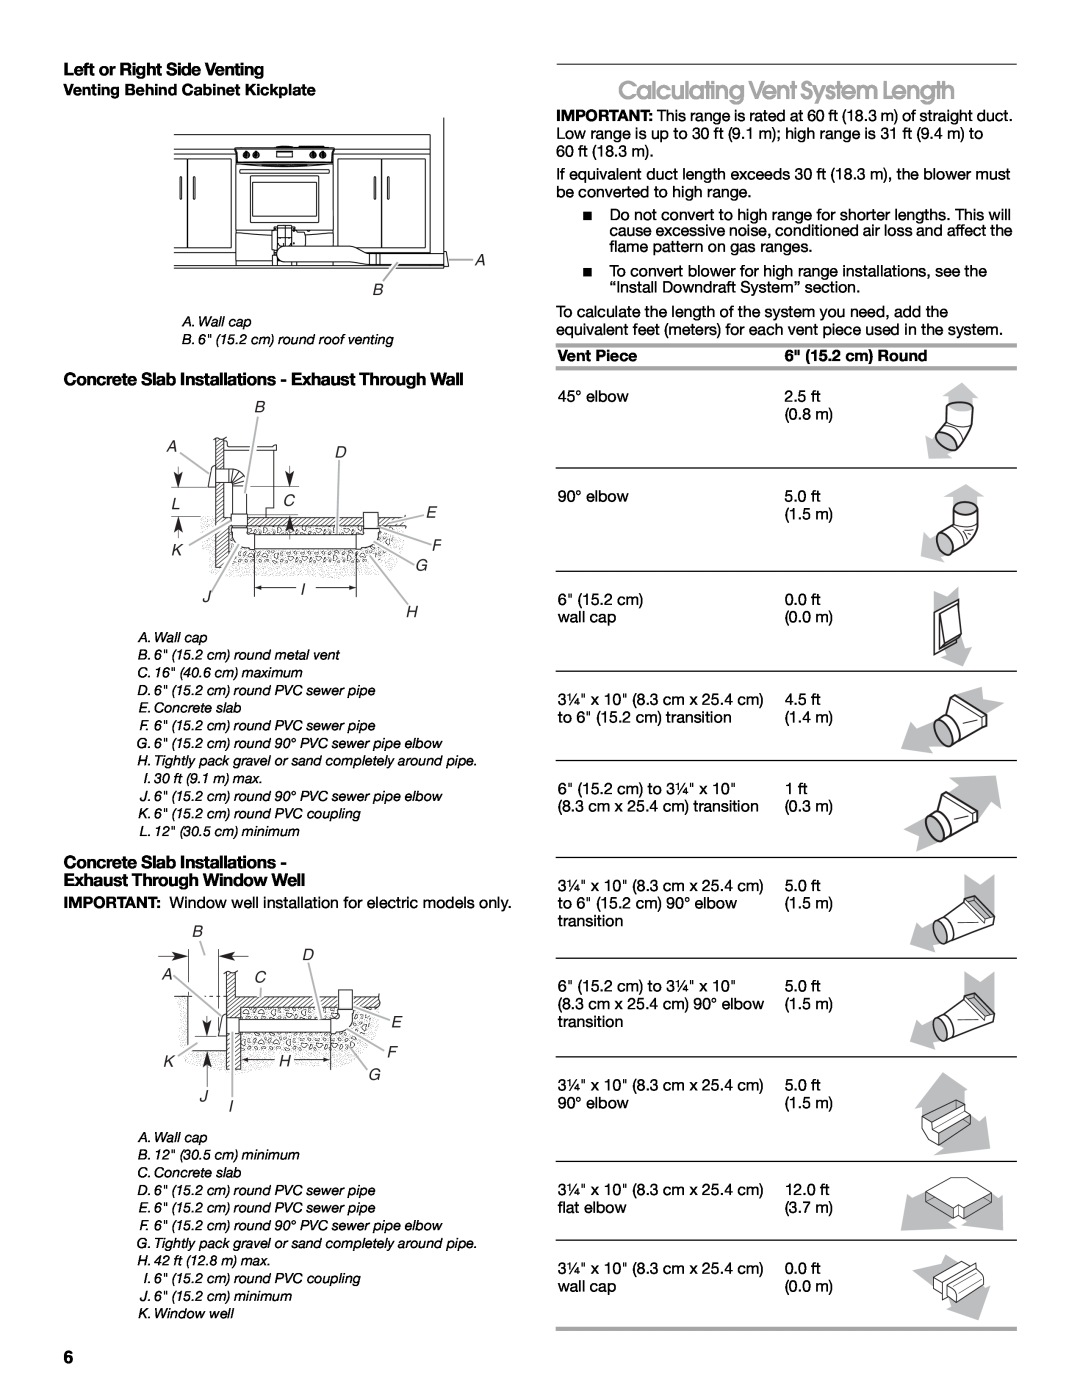 Jenn-Air W10253462A installation instructions Calculating Vent System Length, Left or Right Side Venting, A L K J, D C I 